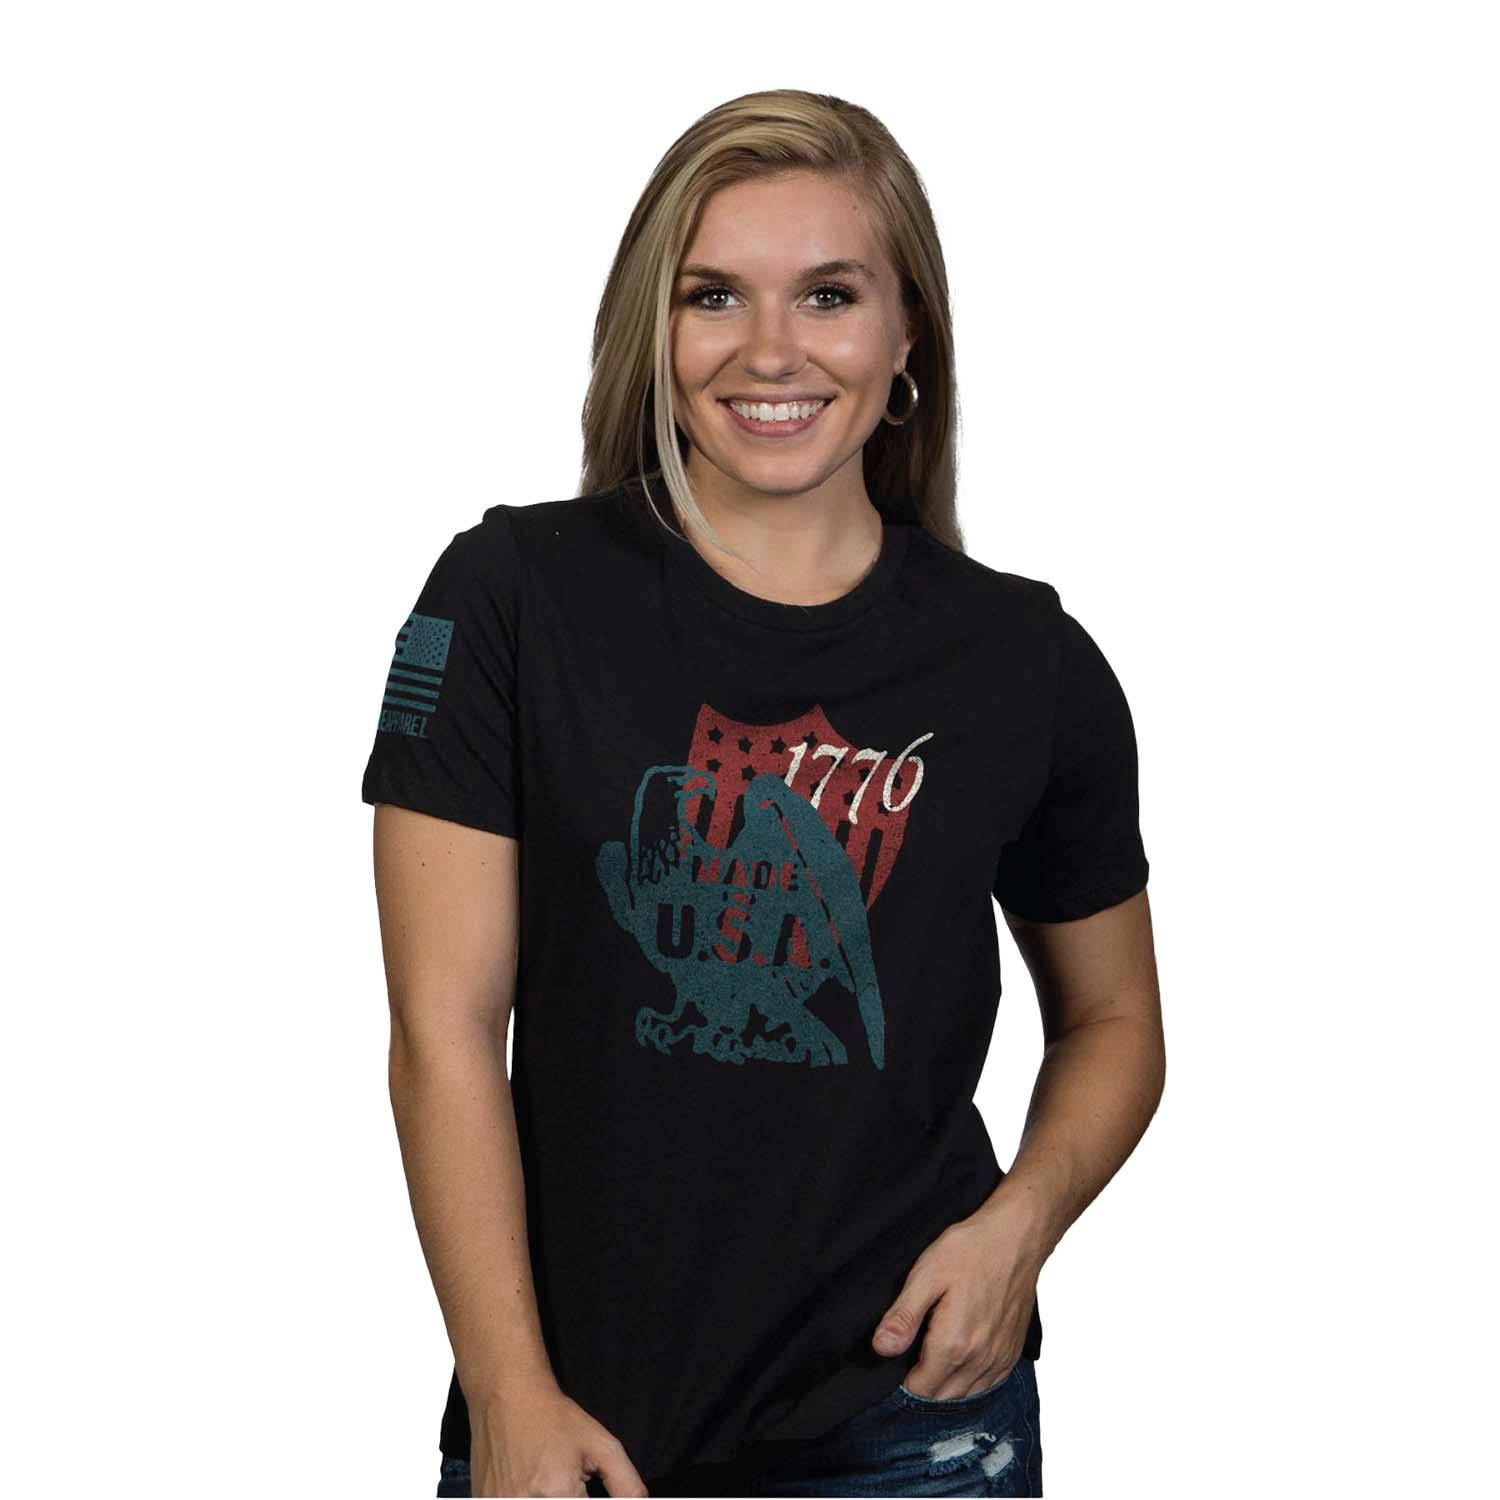 NINE LINE WOMEN'S MADE IN THE USA SHIRT